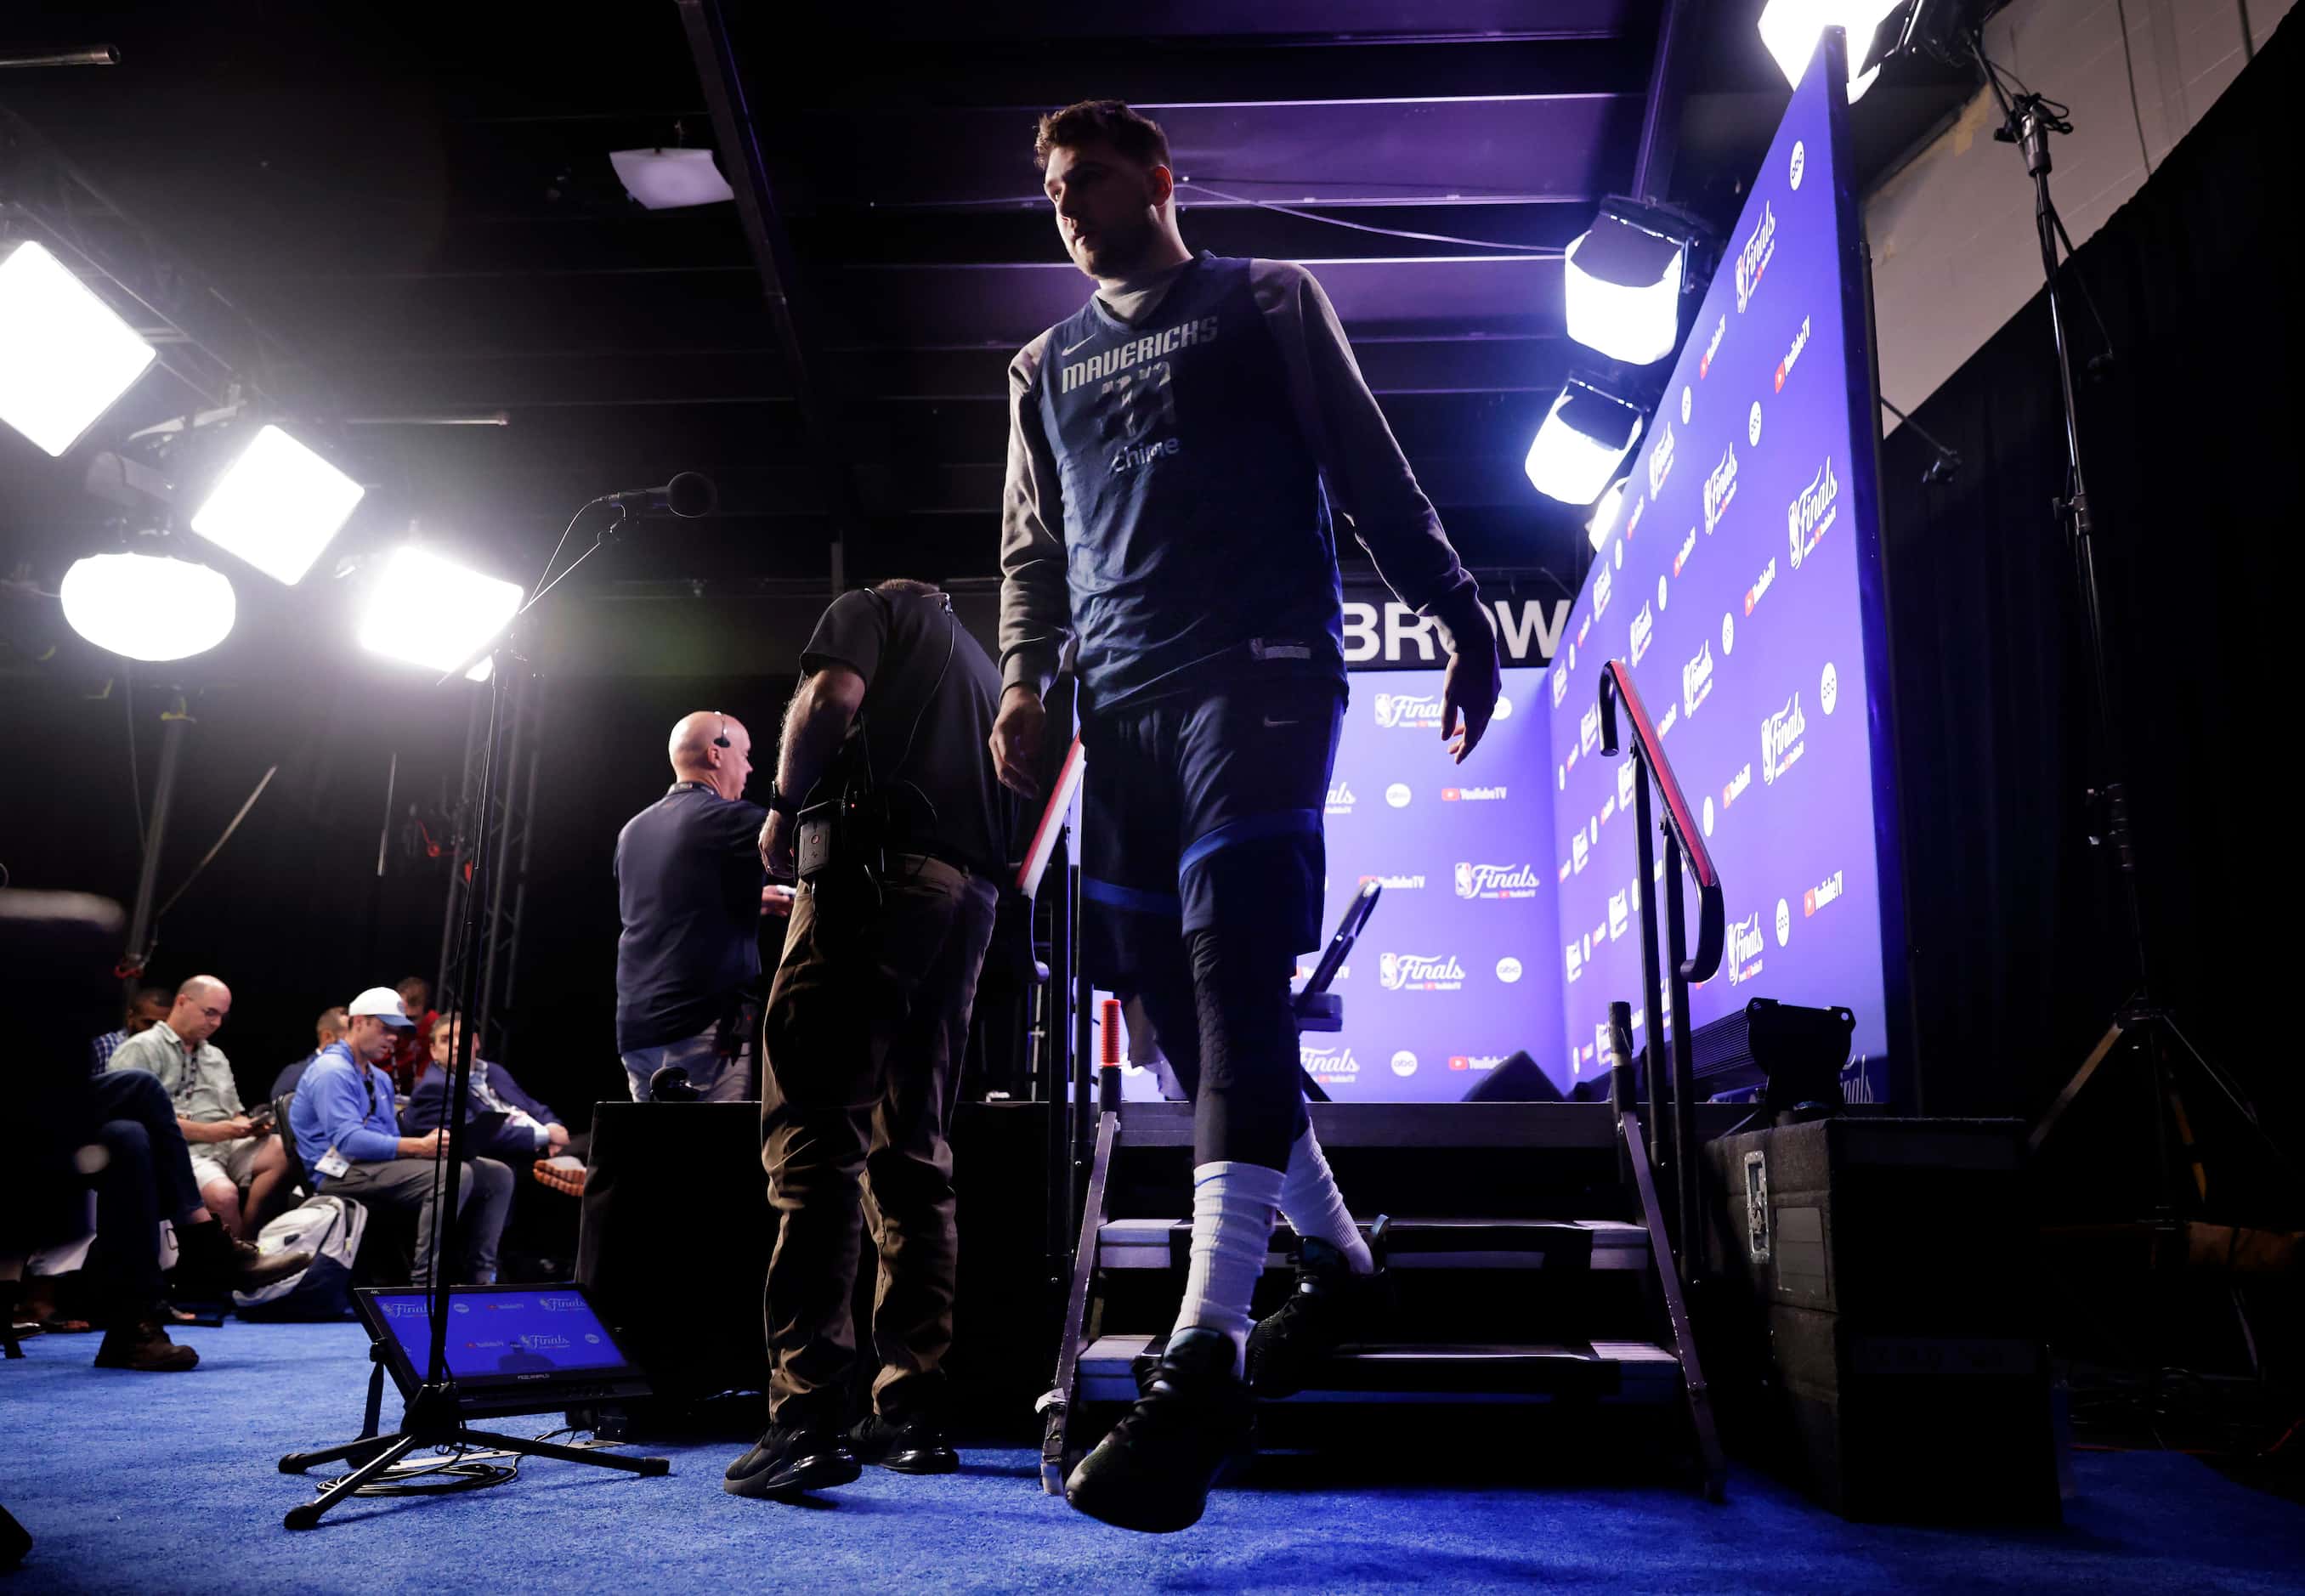 Dallas Mavericks player Luka Doncic steps off the stage after answering questions from the...